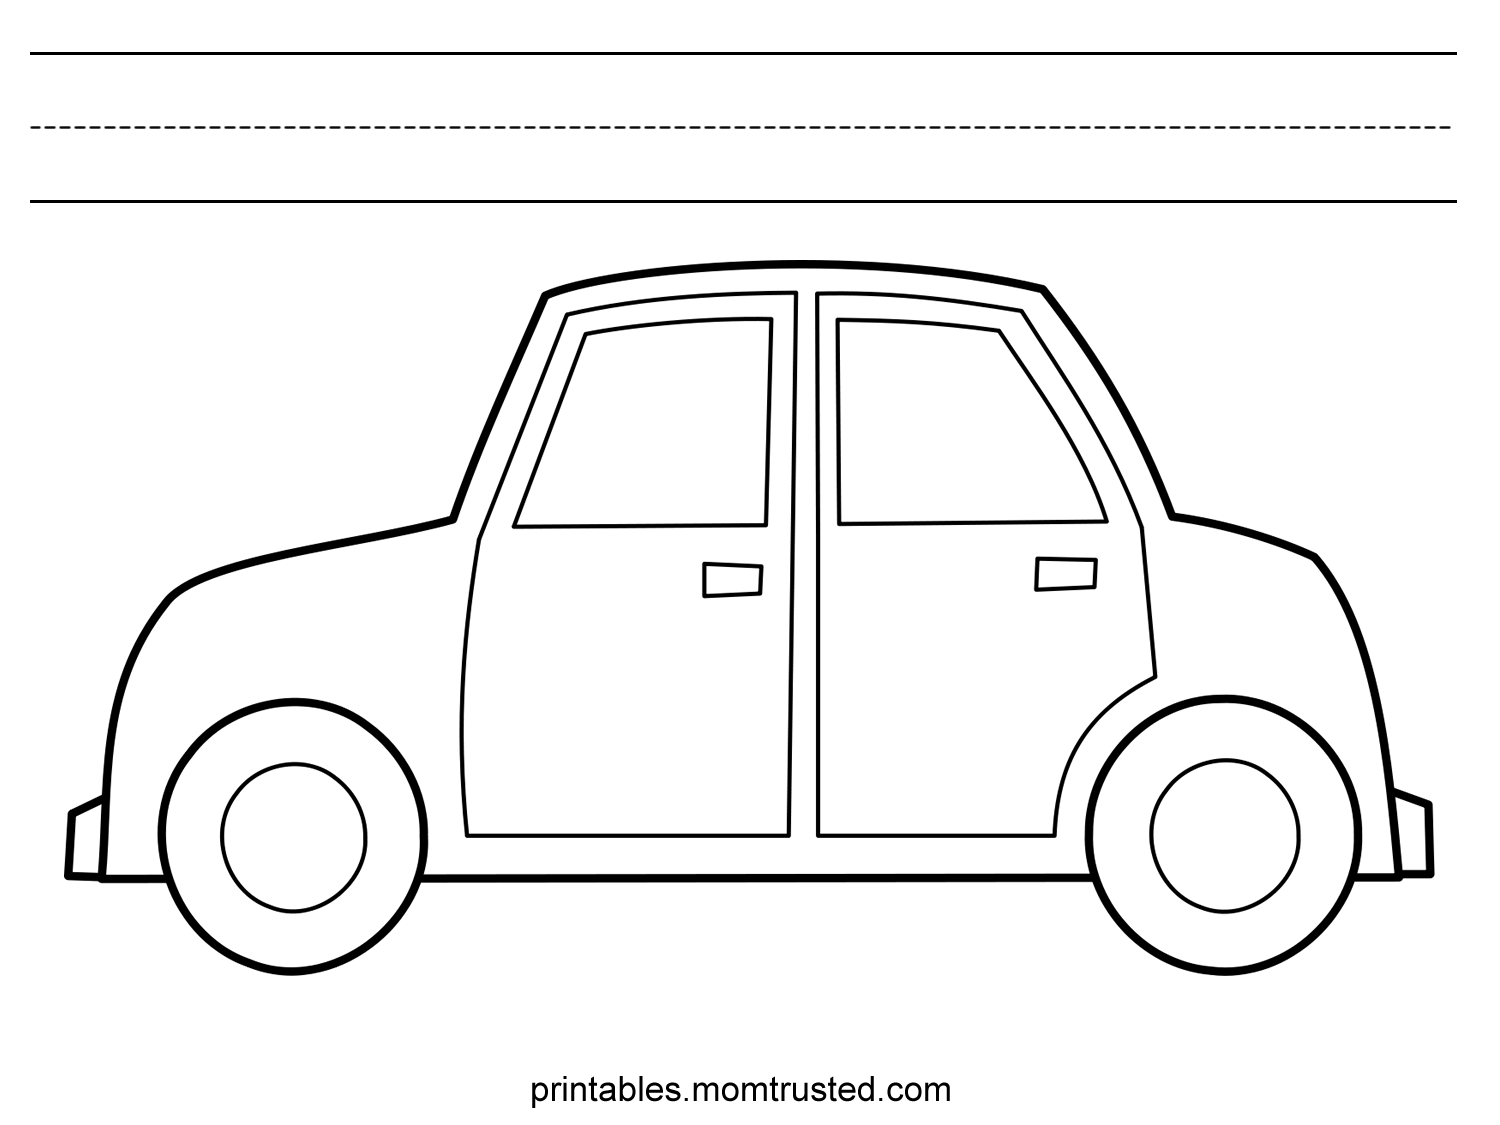 car coloring pages for preschoolers car drawing for preschoolers free download on clipartmag coloring pages preschoolers for car 